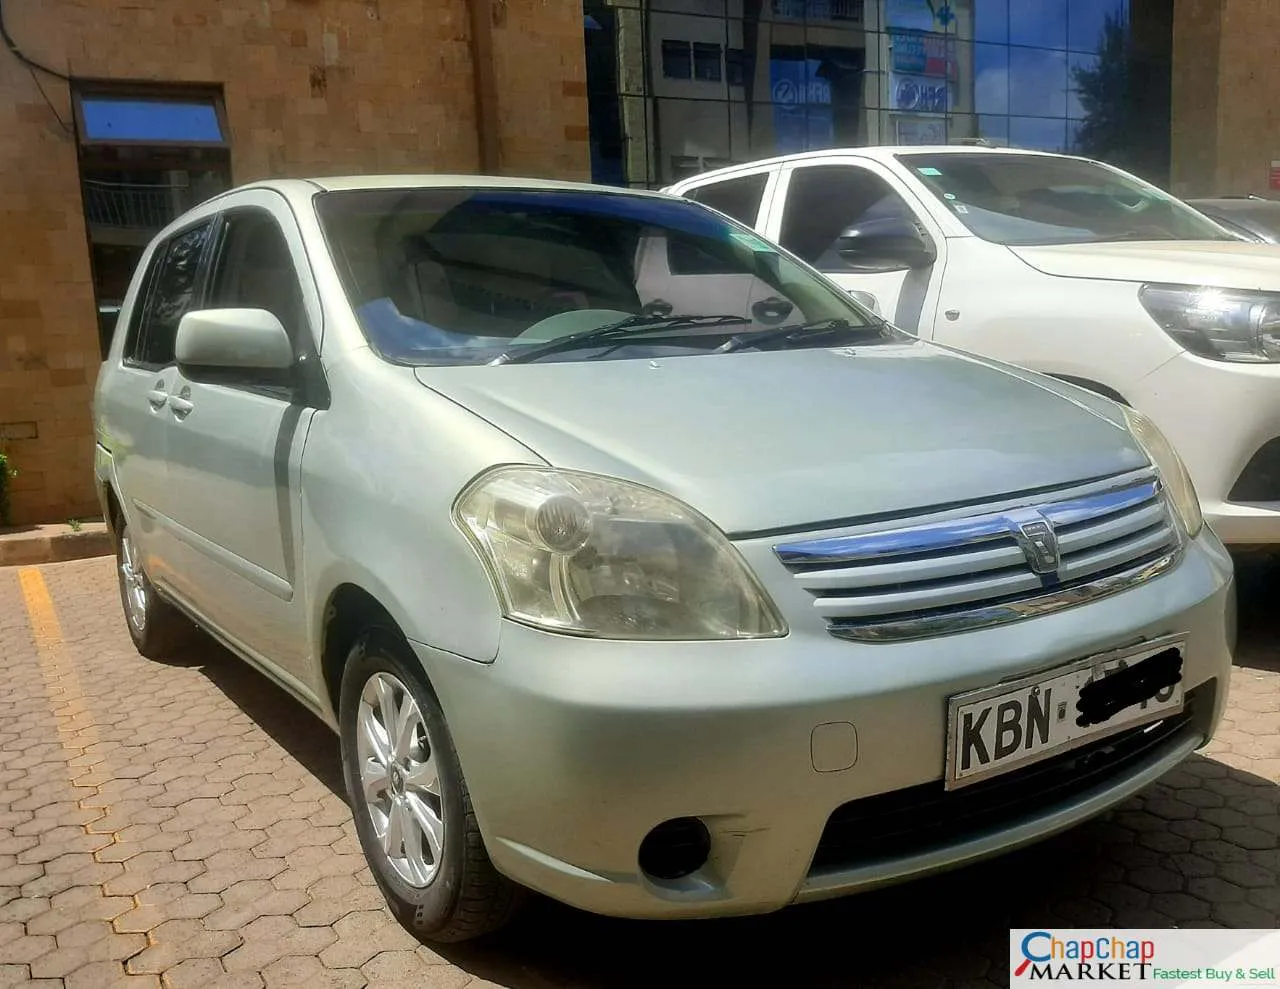 Cars Cars For Sale/Vehicles-Toyota Raum 🔥 You Pay 30% Deposit Trade in OK EXCLUSIVE 3